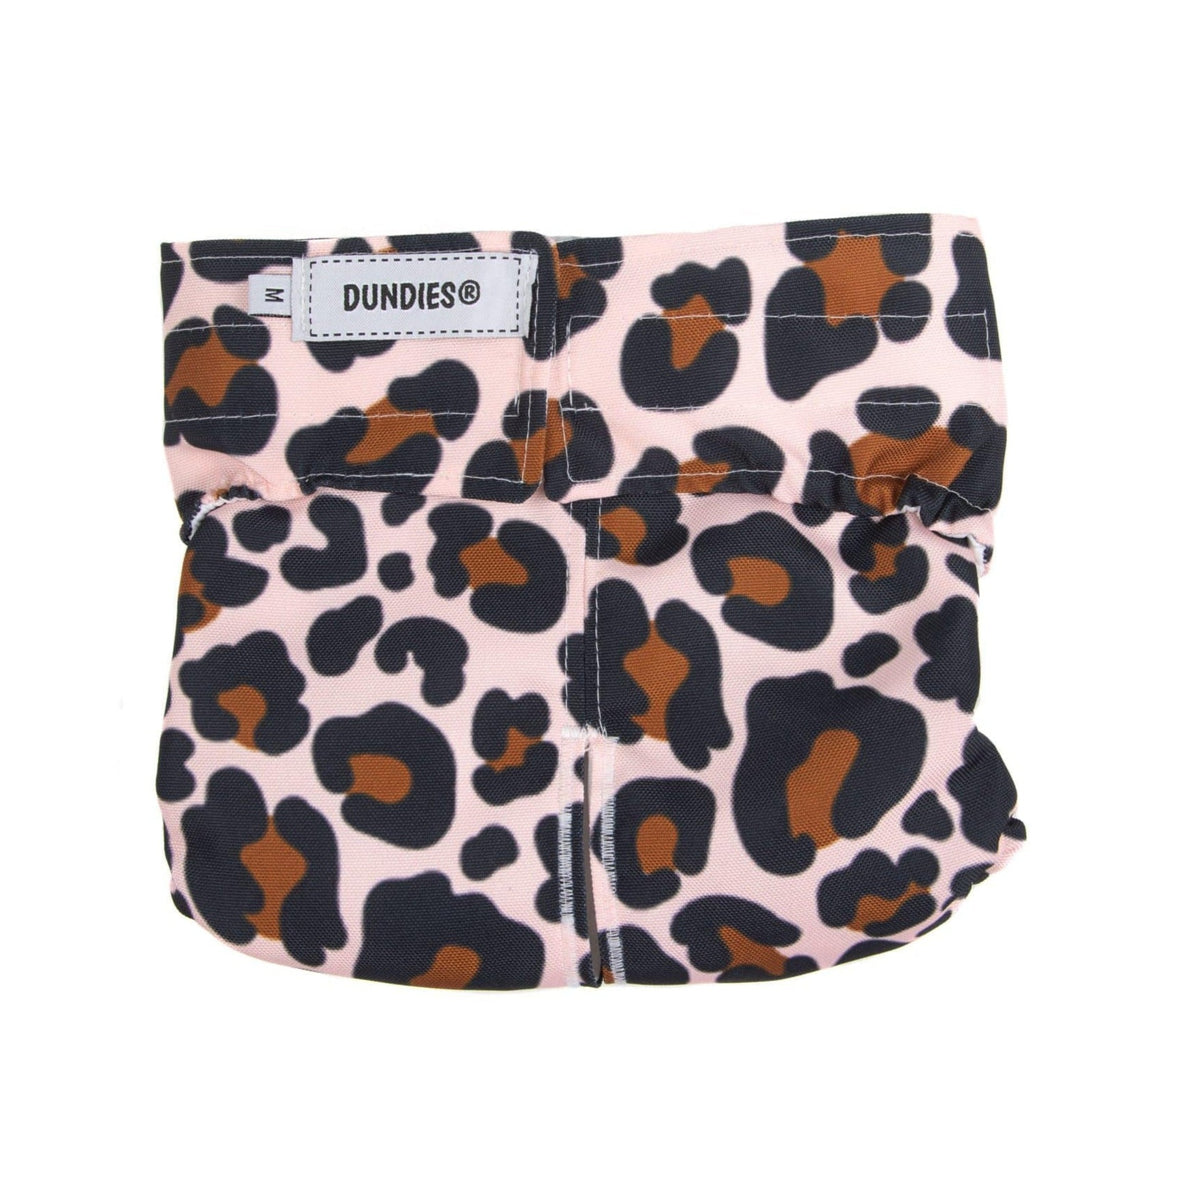 Dundies Leopard Snappie-Dundies Australia - Vet Recommended Pet Nappies